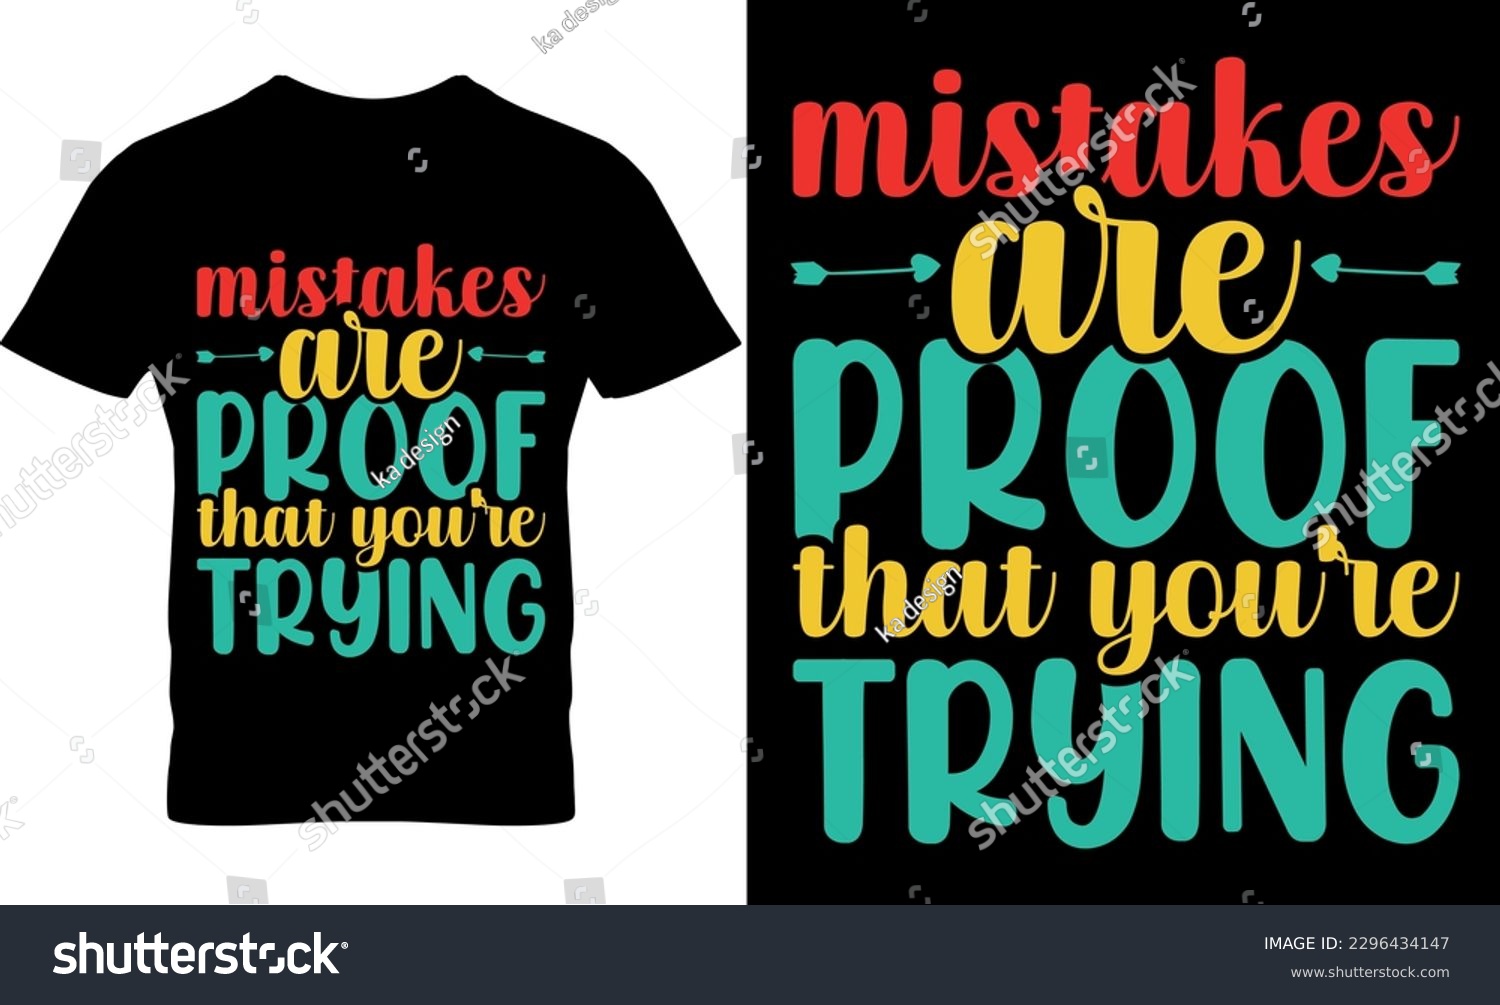 SVG of mistakes are proof that you are trying, Graphic, illustration, vector, typography, motivational, inspiration, inspiration t-shirt design, Typography t-shirt design, motivational t-shirt design, svg